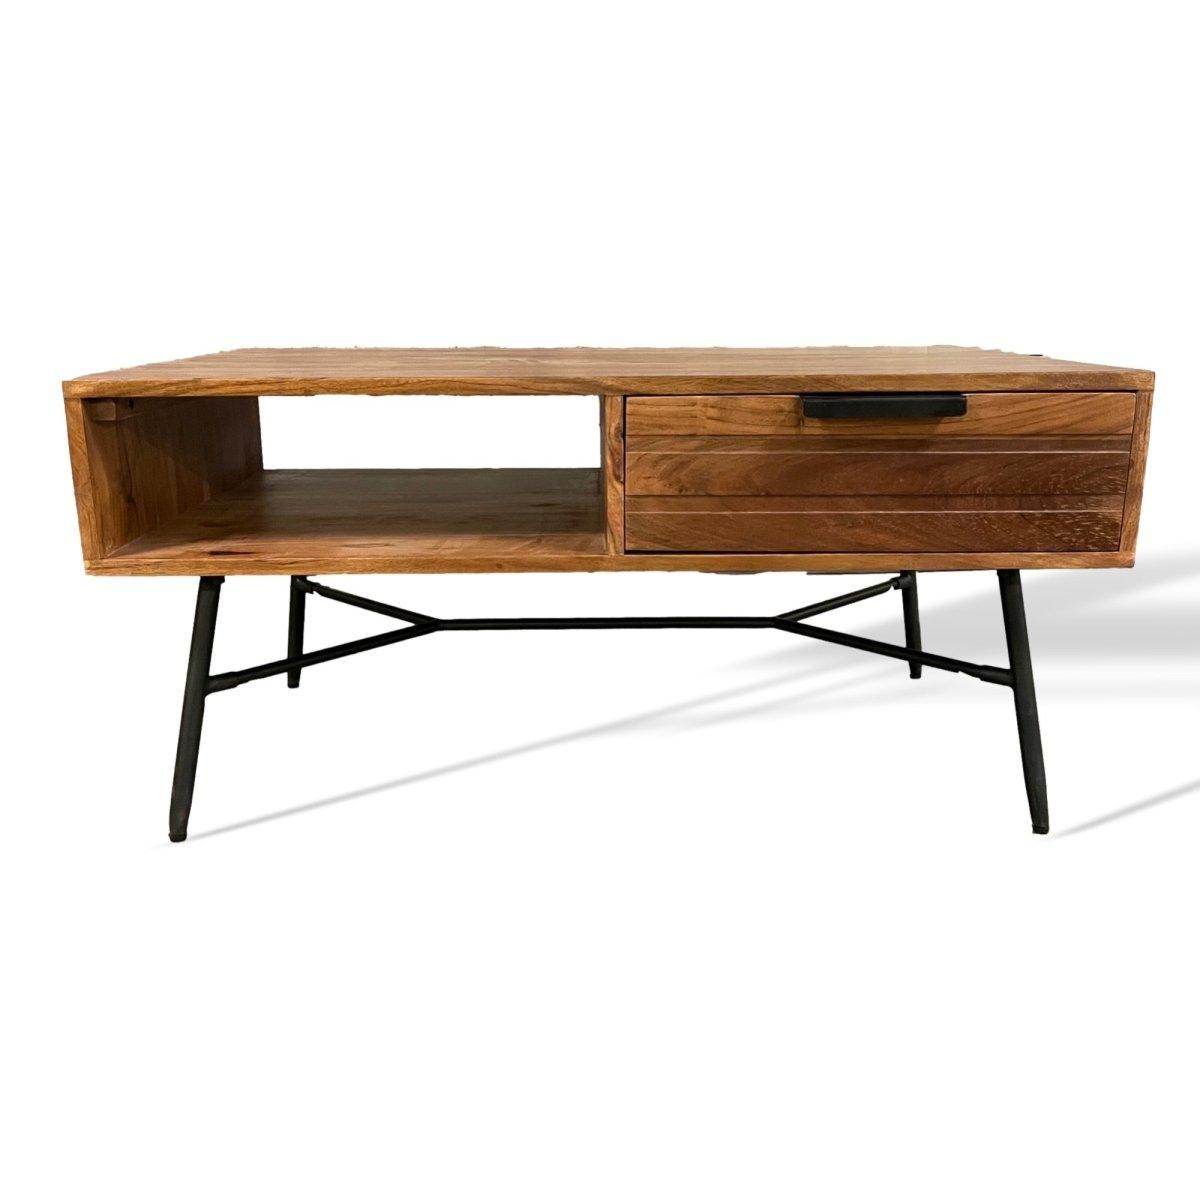 Yoga Acacia Wood Coffee Table - Rustic Furniture Outlet